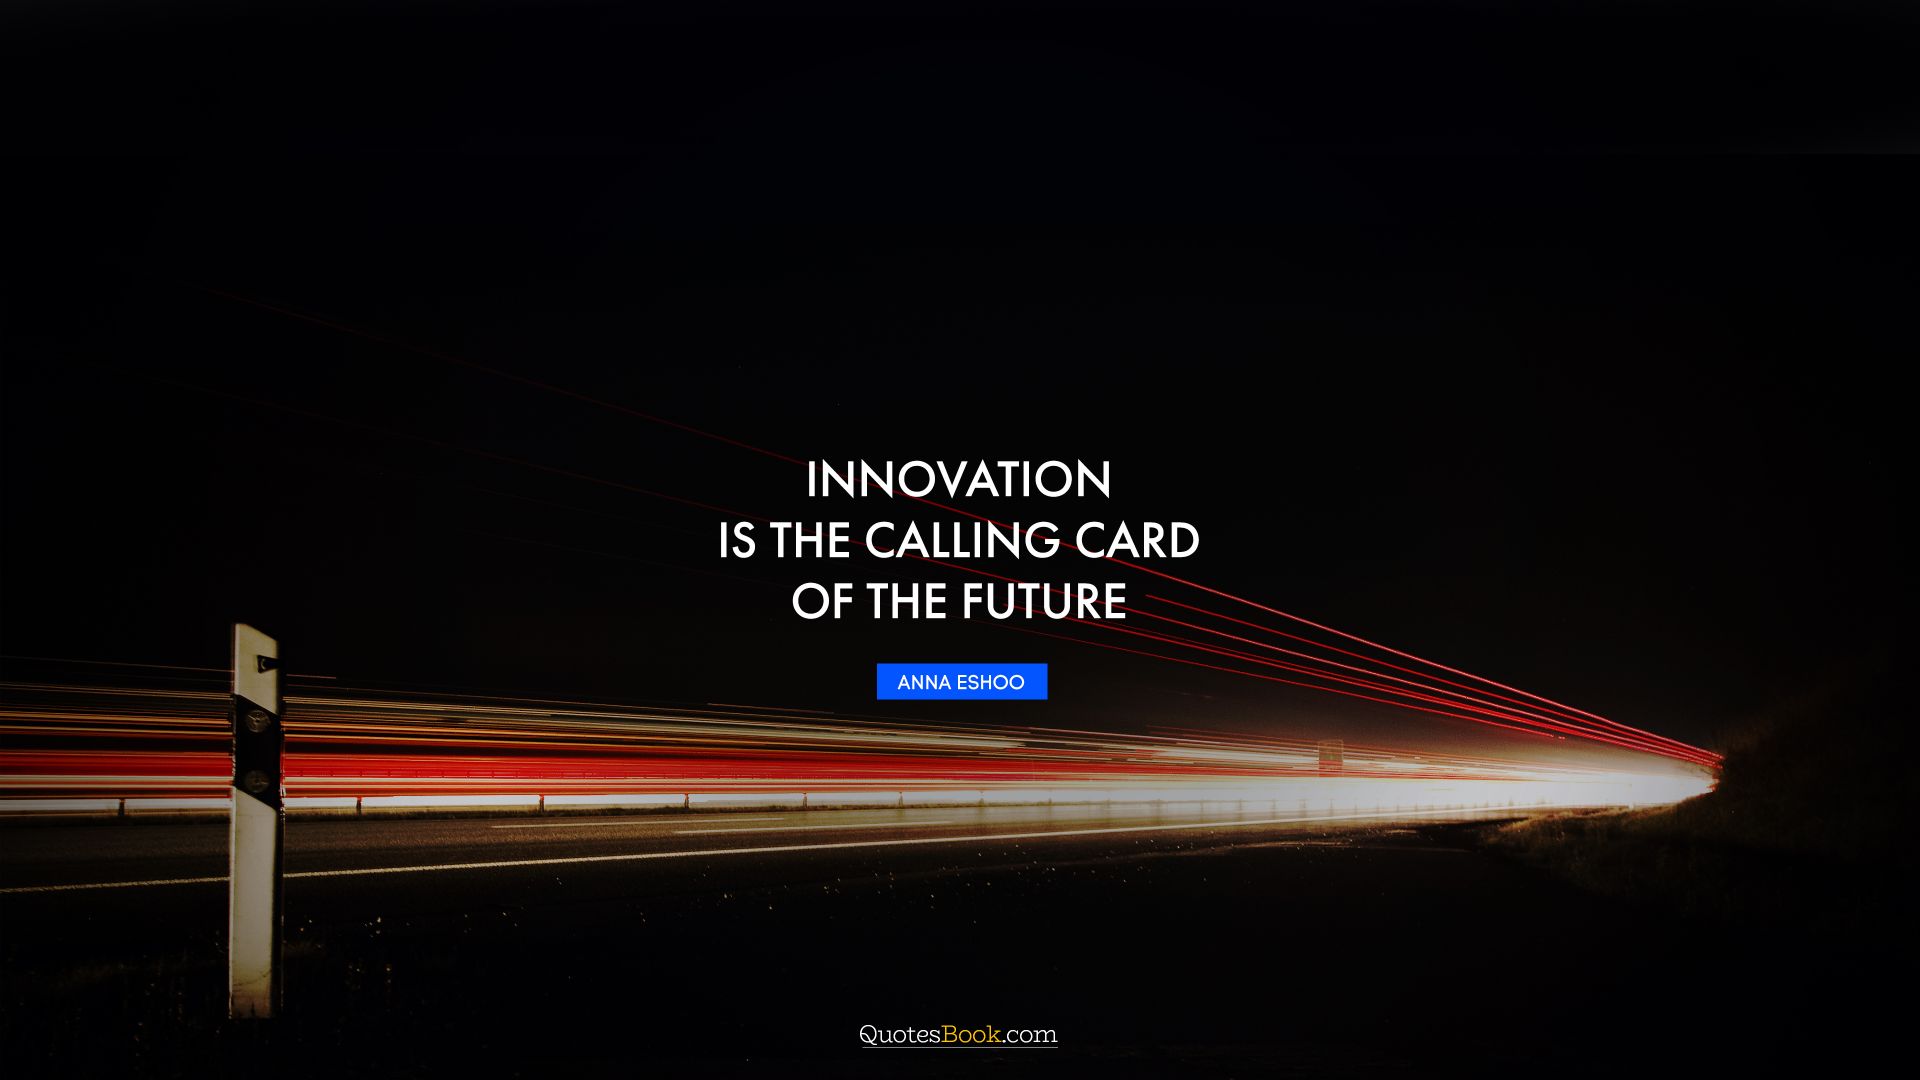 Innovation is the calling card of the future. - Quote by Anna Eshoo